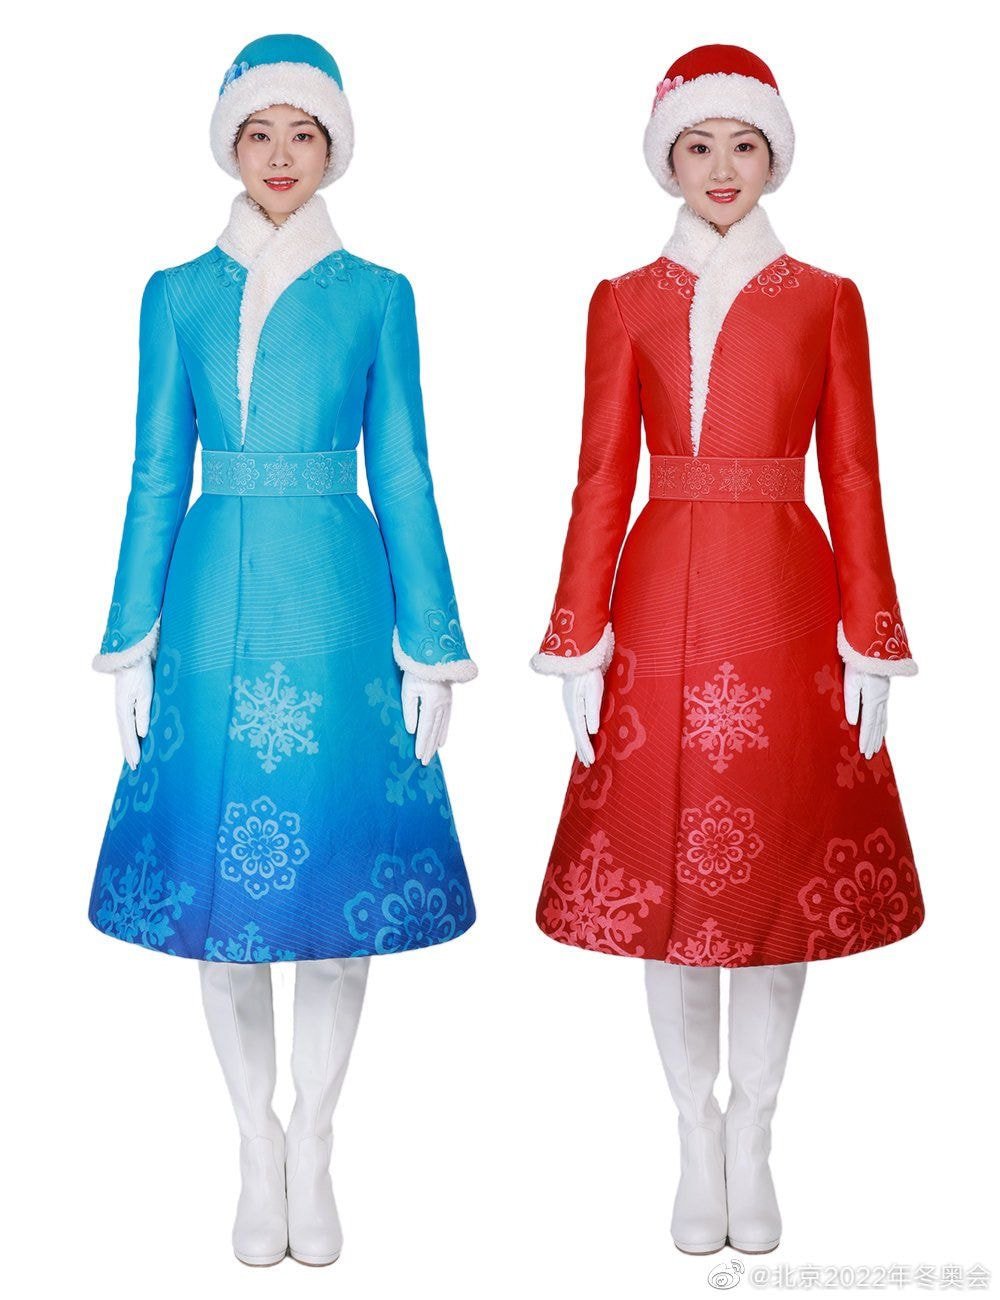 Outfit for assistants for the 2022 Beijing Winter Olympics.jpg